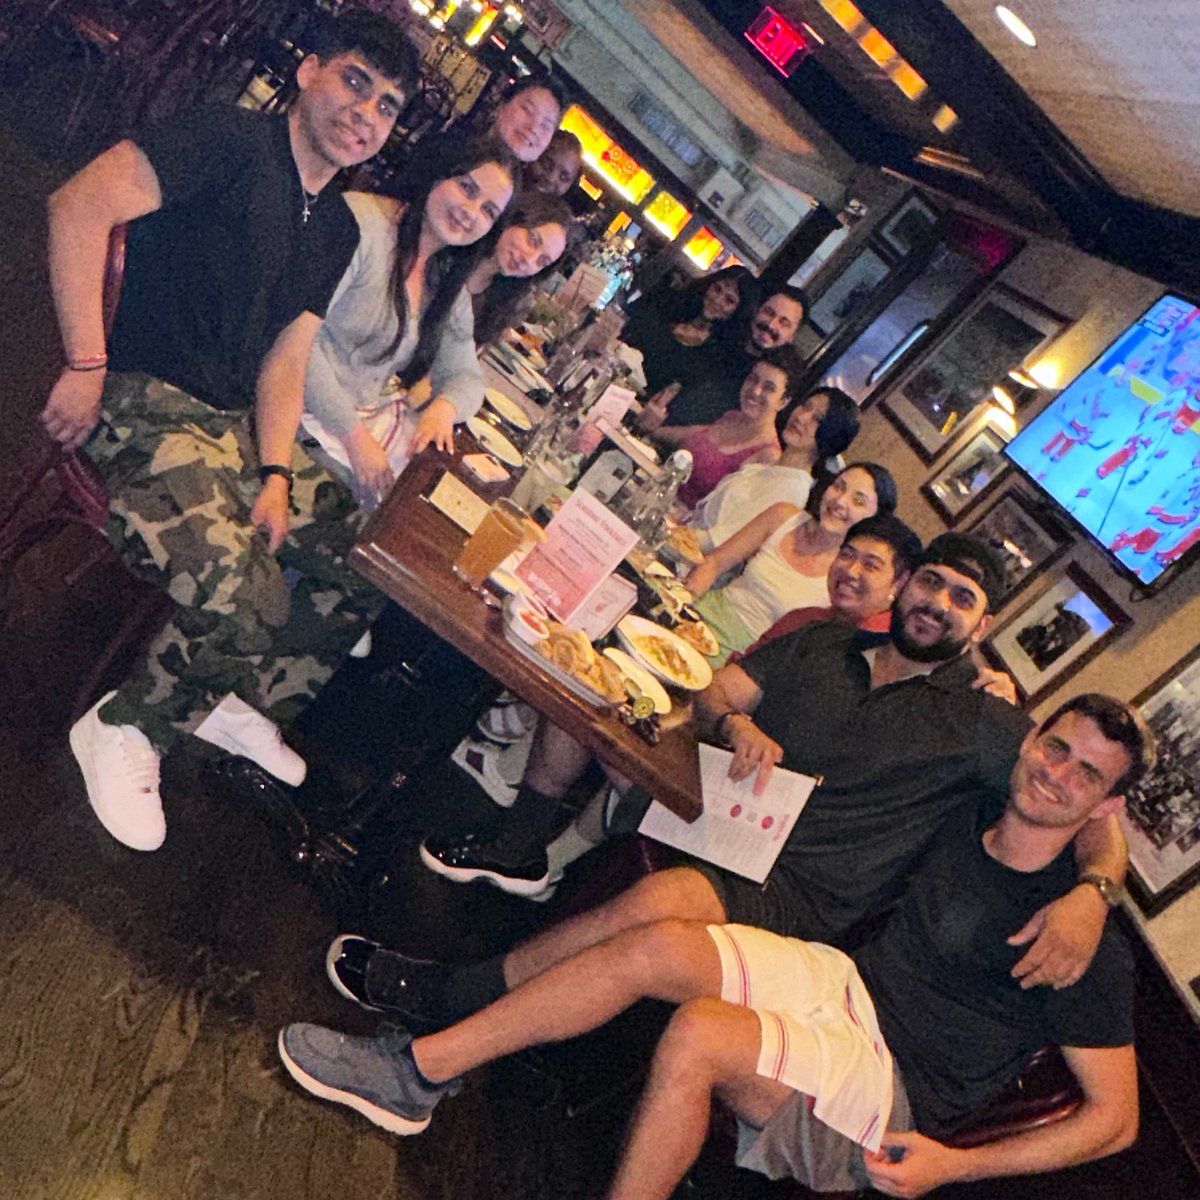 GSBMS master's and Ph.D. students celebrating their final cell biology exam. Many who are graduating! Time really flew by the past 2 years,! // #NYMCambassador post from Christopher L., BMS student, #NYMC GSBMS. #NYMCGSBMS #biomedicalsciences #gradschool #college // #westchester